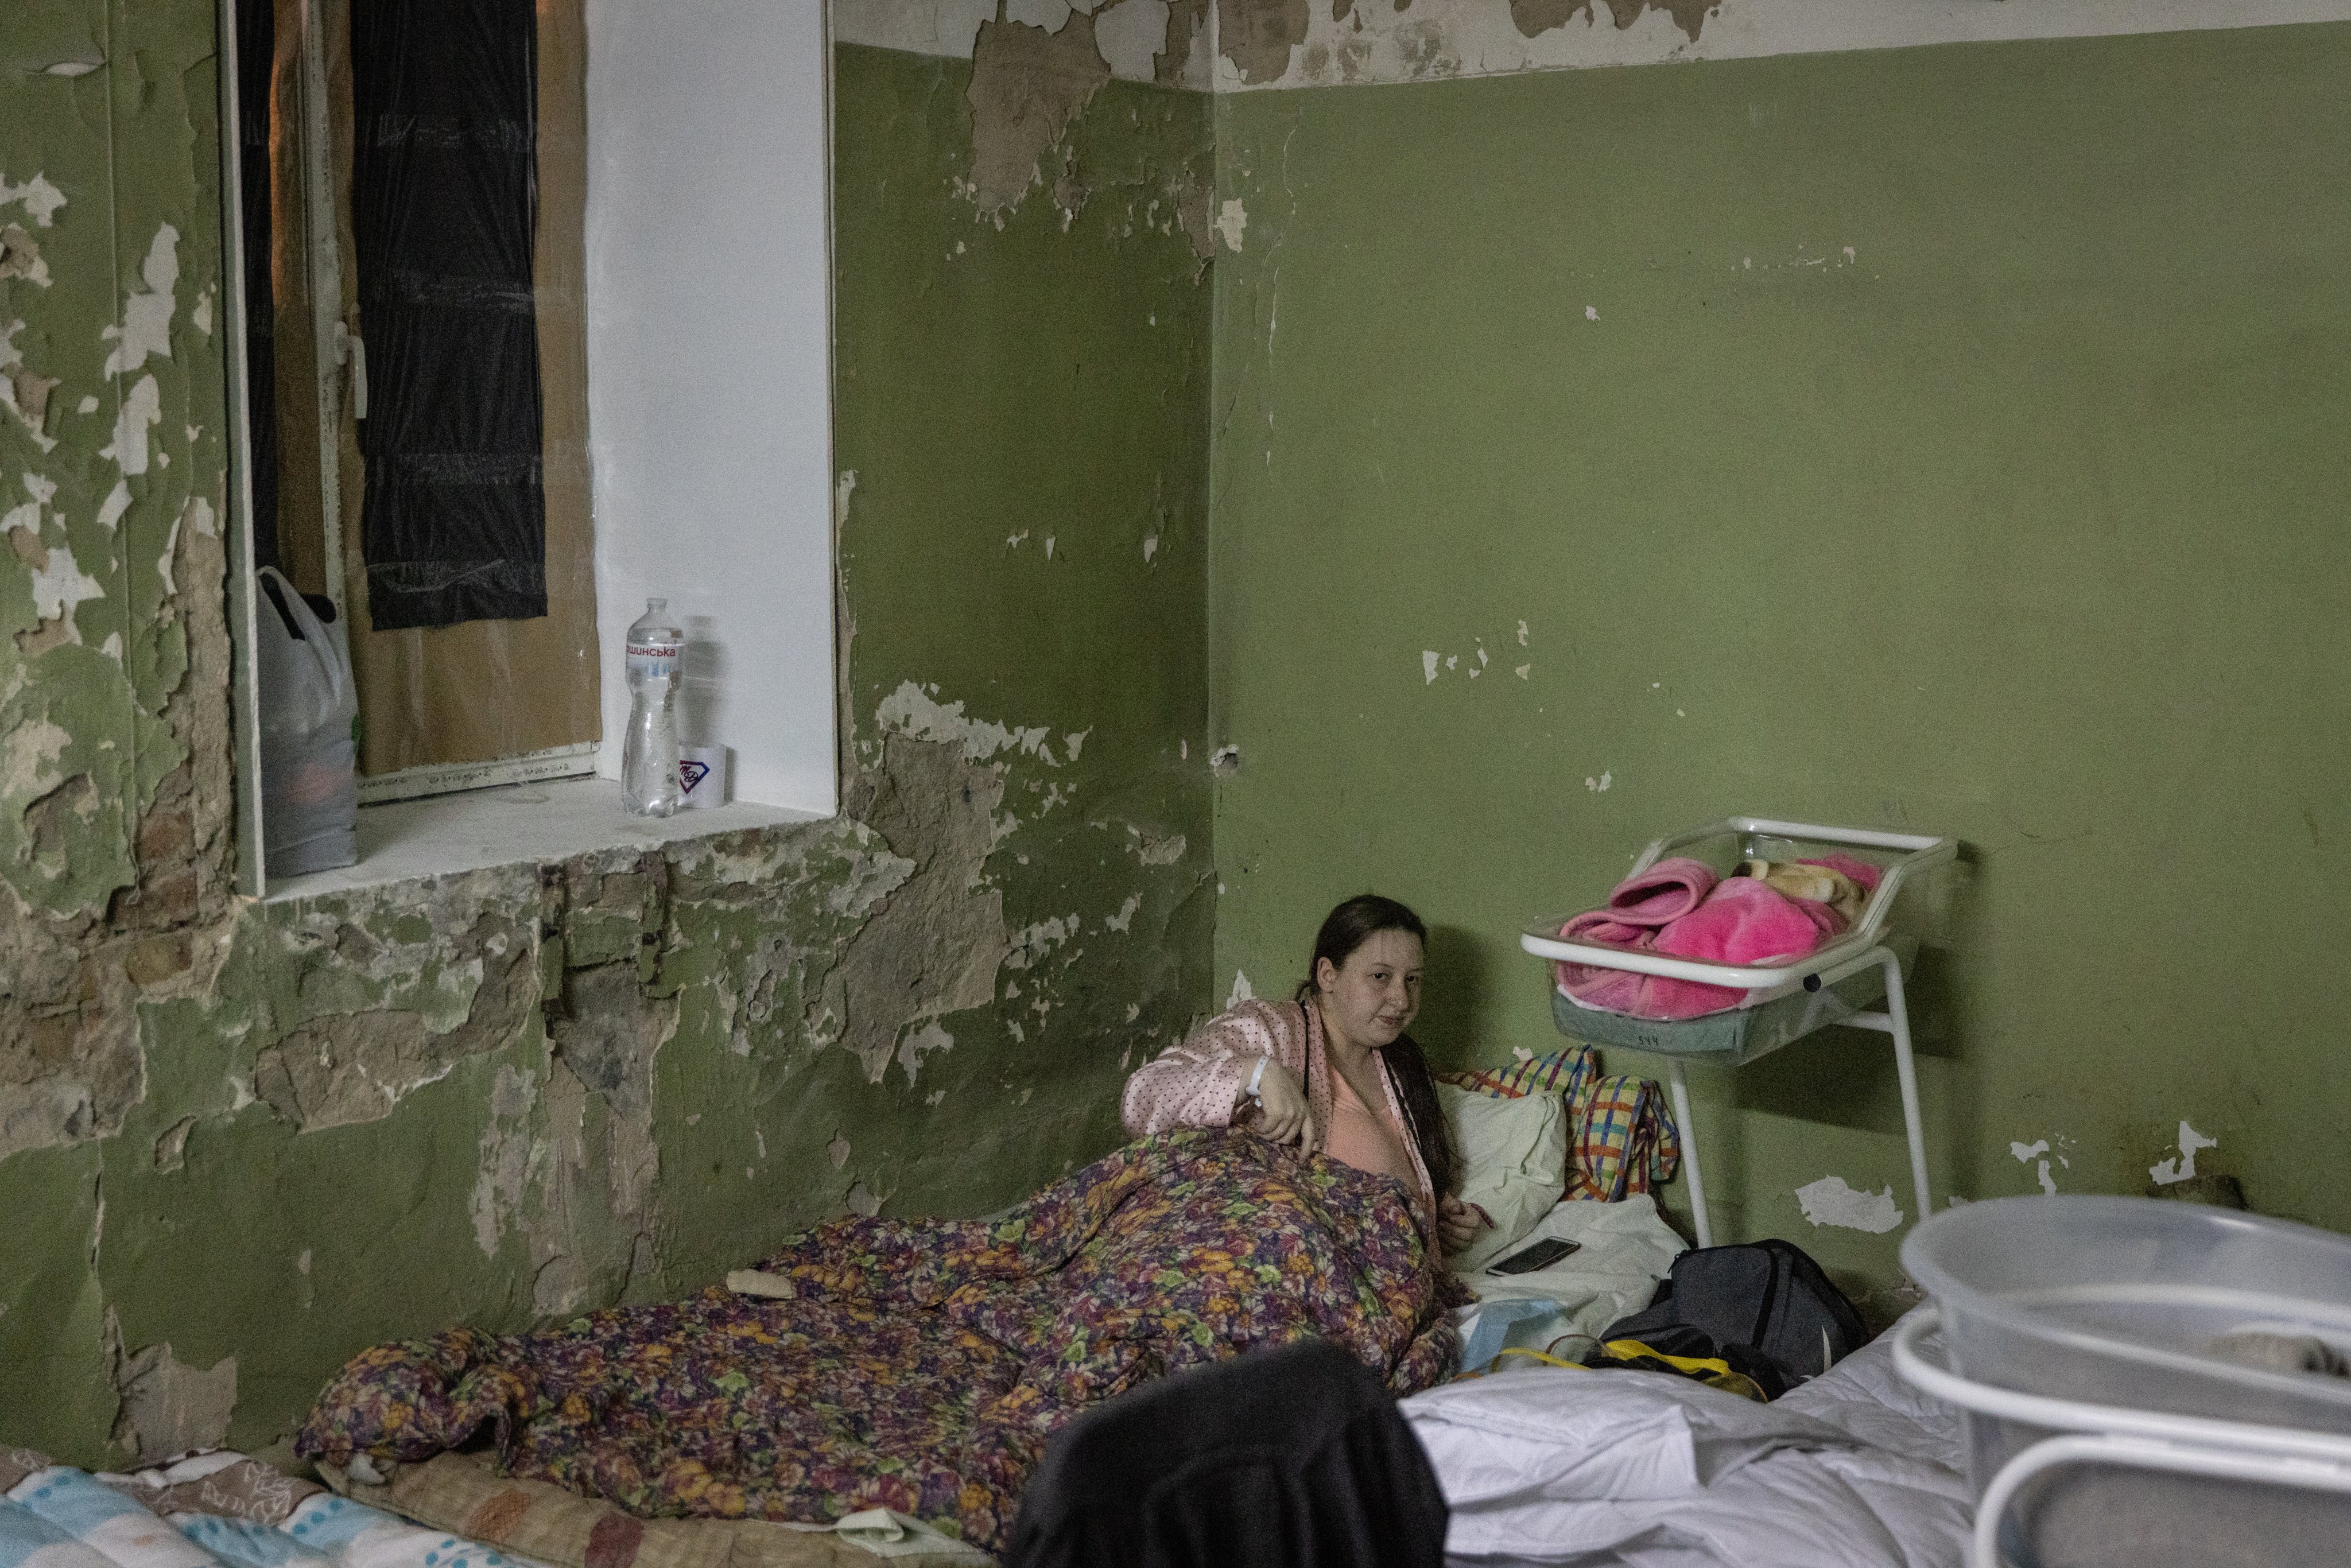 Maternity Ward Patients In Kyiv Hospital Move To Bomb Shelter Amid Russian Attack